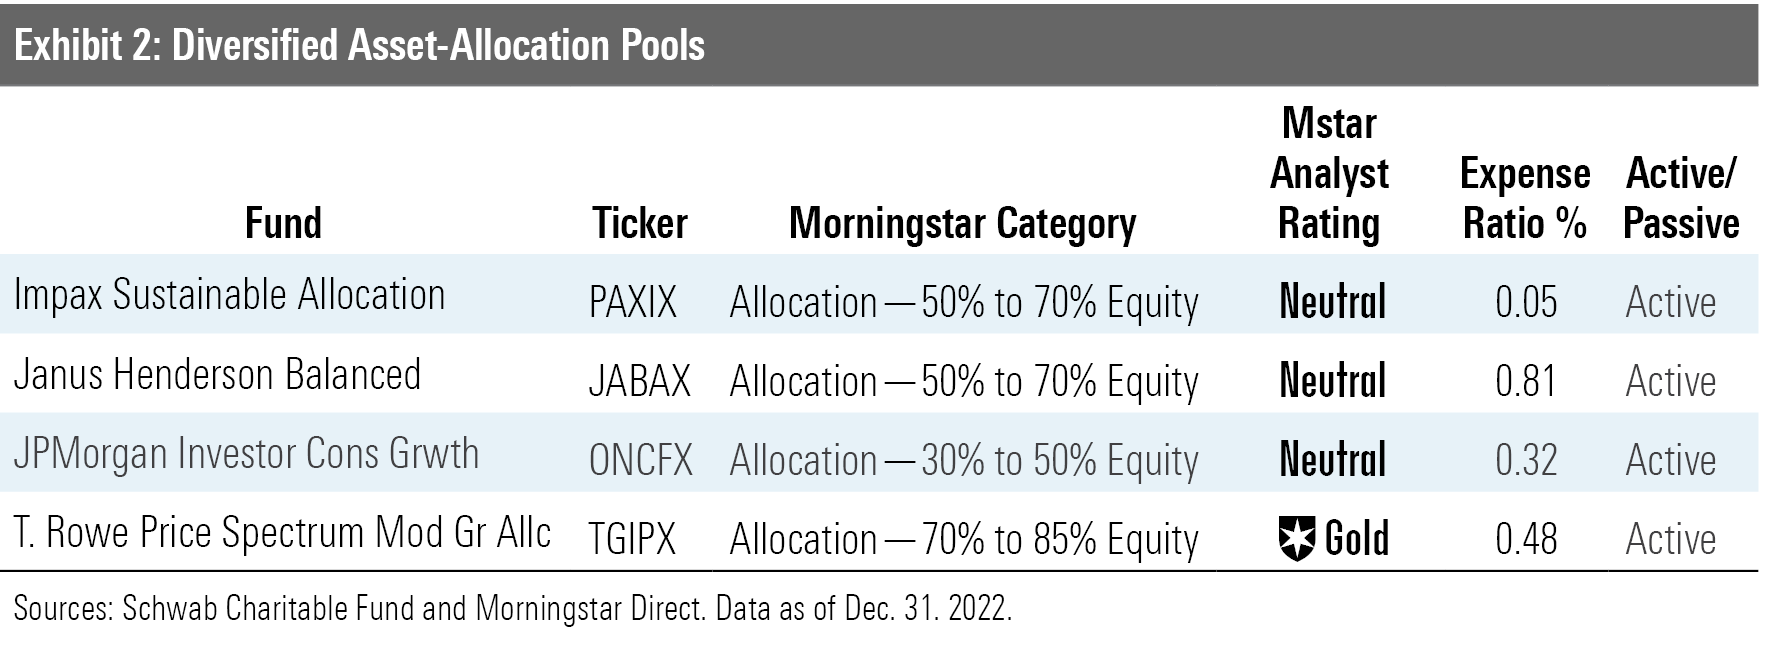 A table showing the underlying investments for Schwab Charitable Fund's diversified asset-allocation pools.